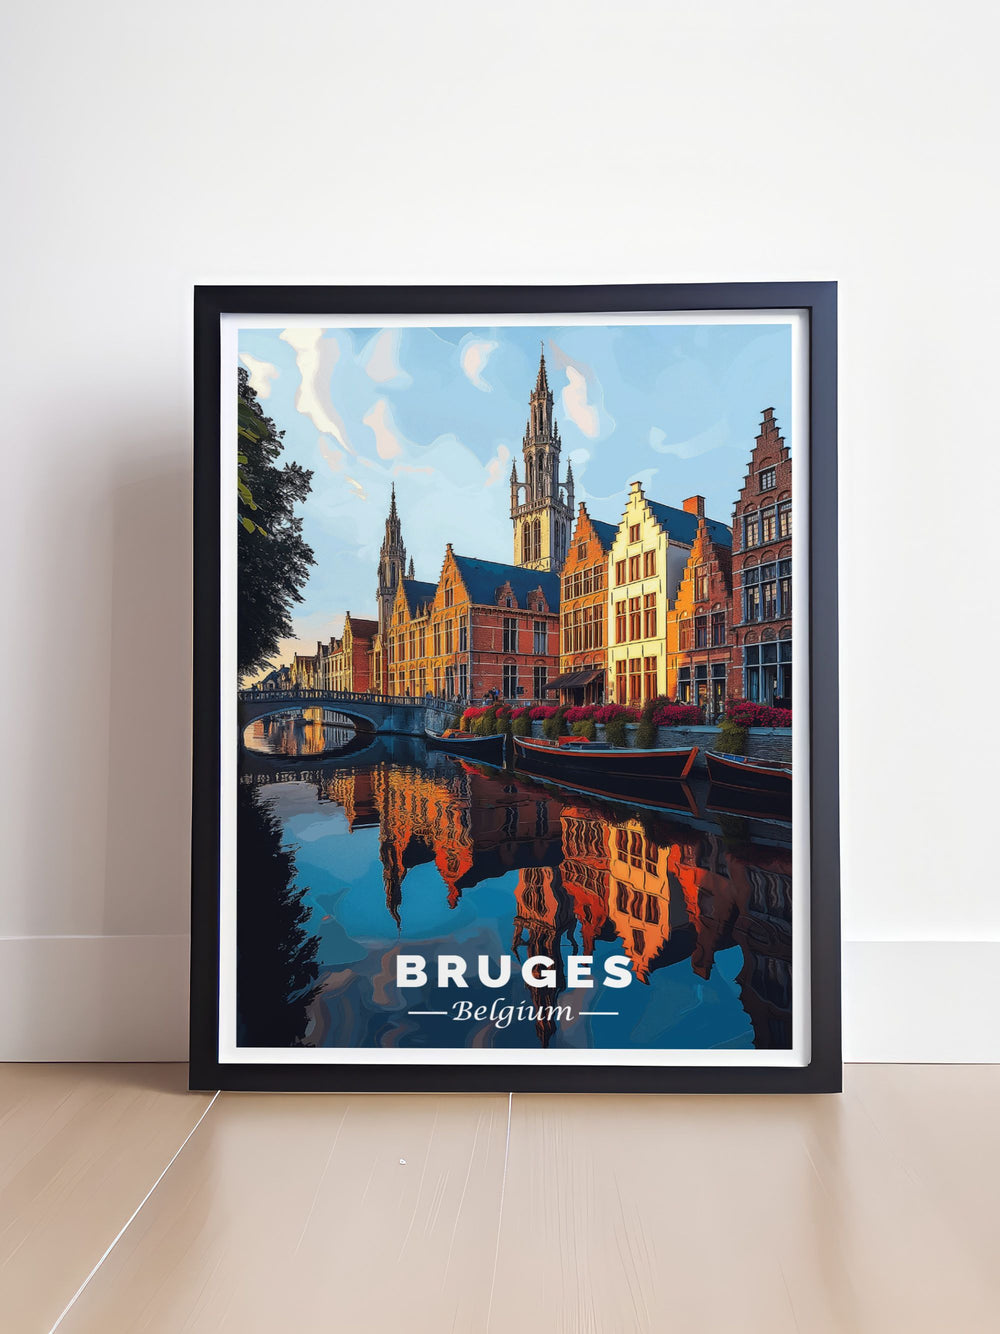 Stunning Bruges wall art depicting a charming canal scene in Belgium. This artwork showcases the timeless beauty of Bruges cobbled streets and iconic canals bringing a touch of elegance to any room. Ideal for travel enthusiasts and art lovers.